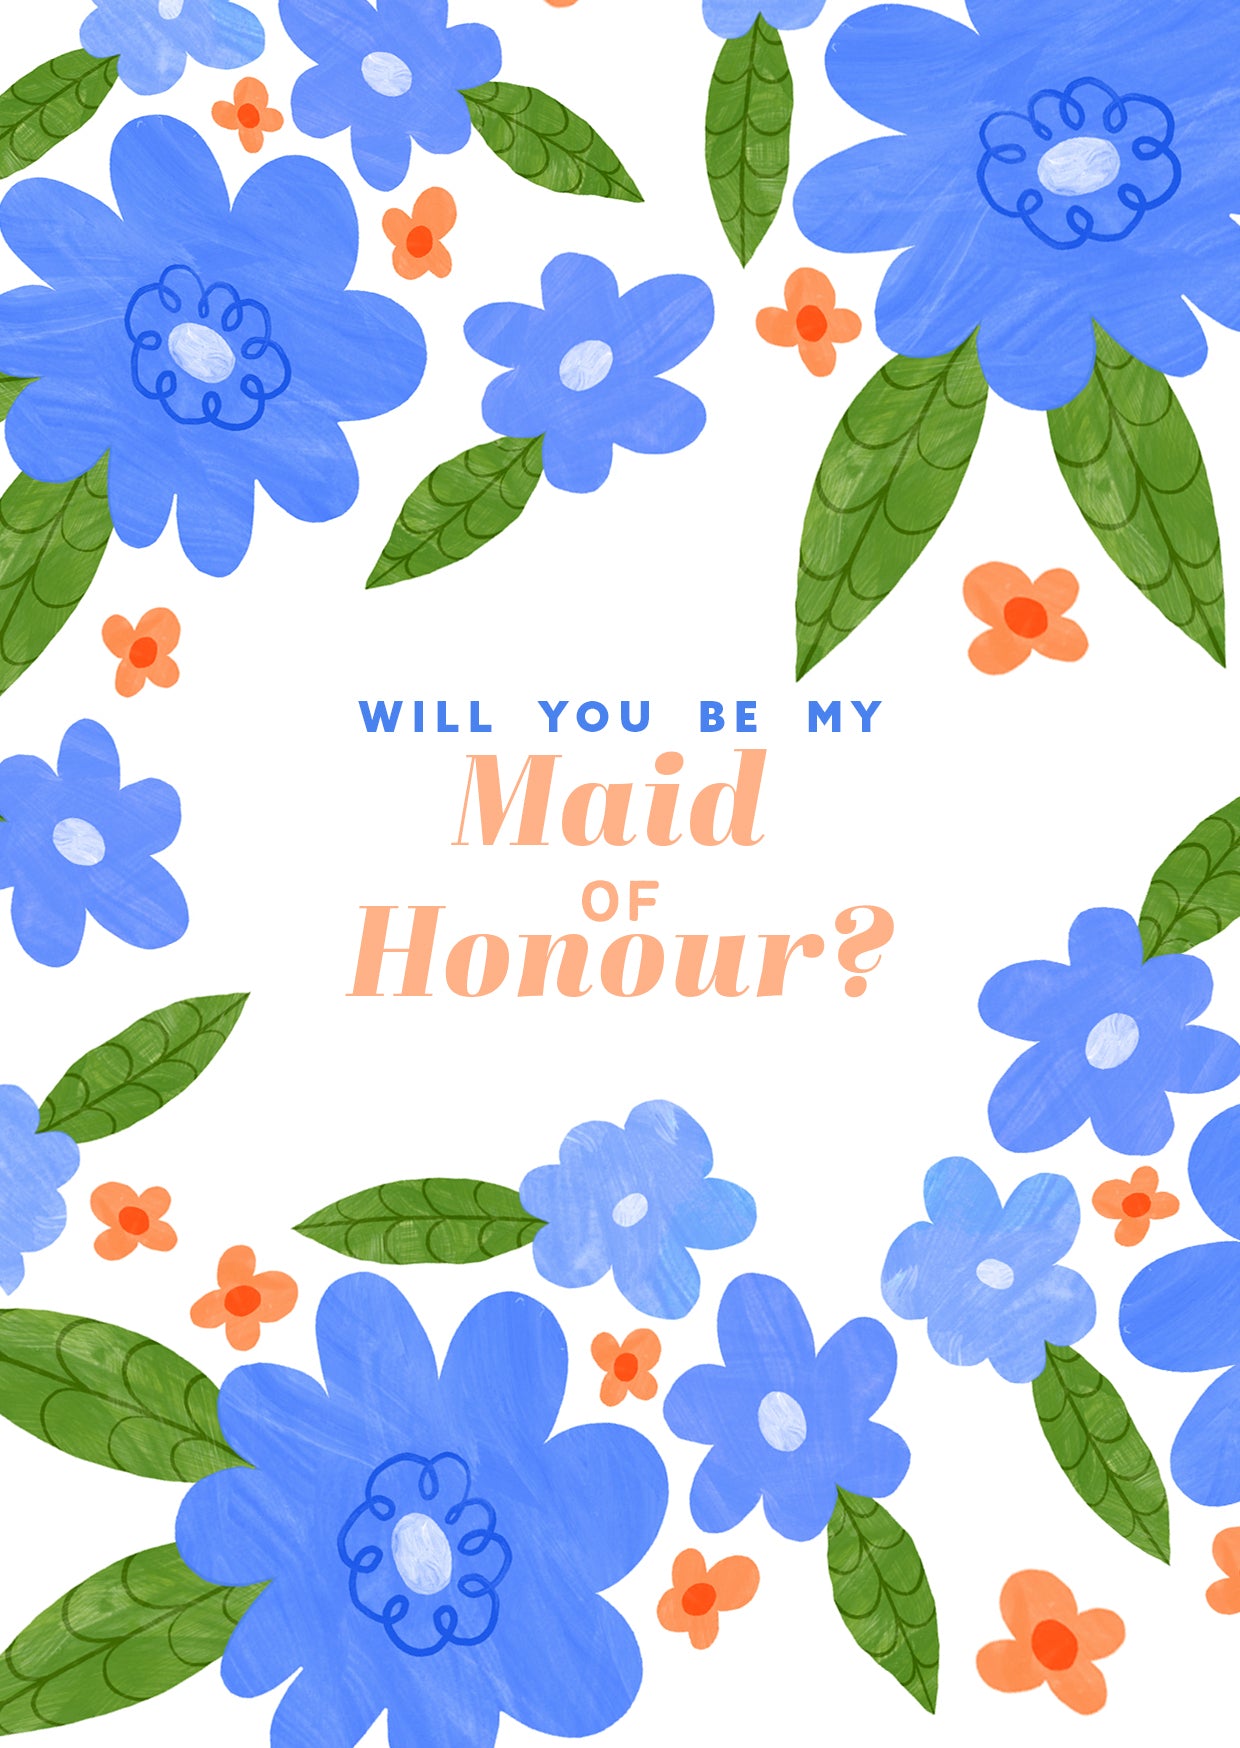 Will you be my Maid of Honour?